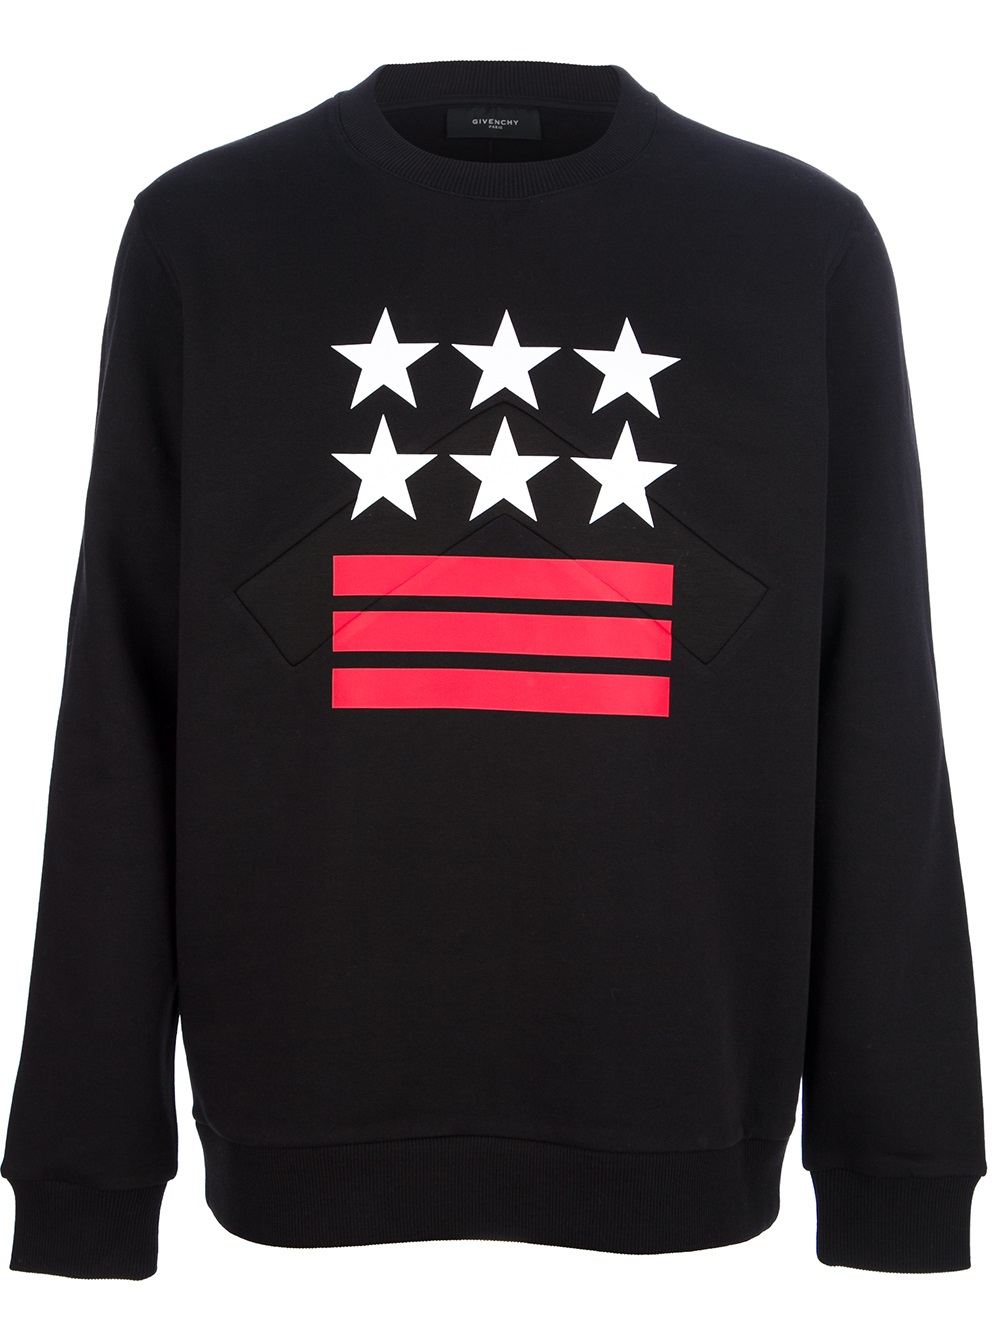 Lyst - Givenchy Stars and Stripes Sweatshirt in Black for Men